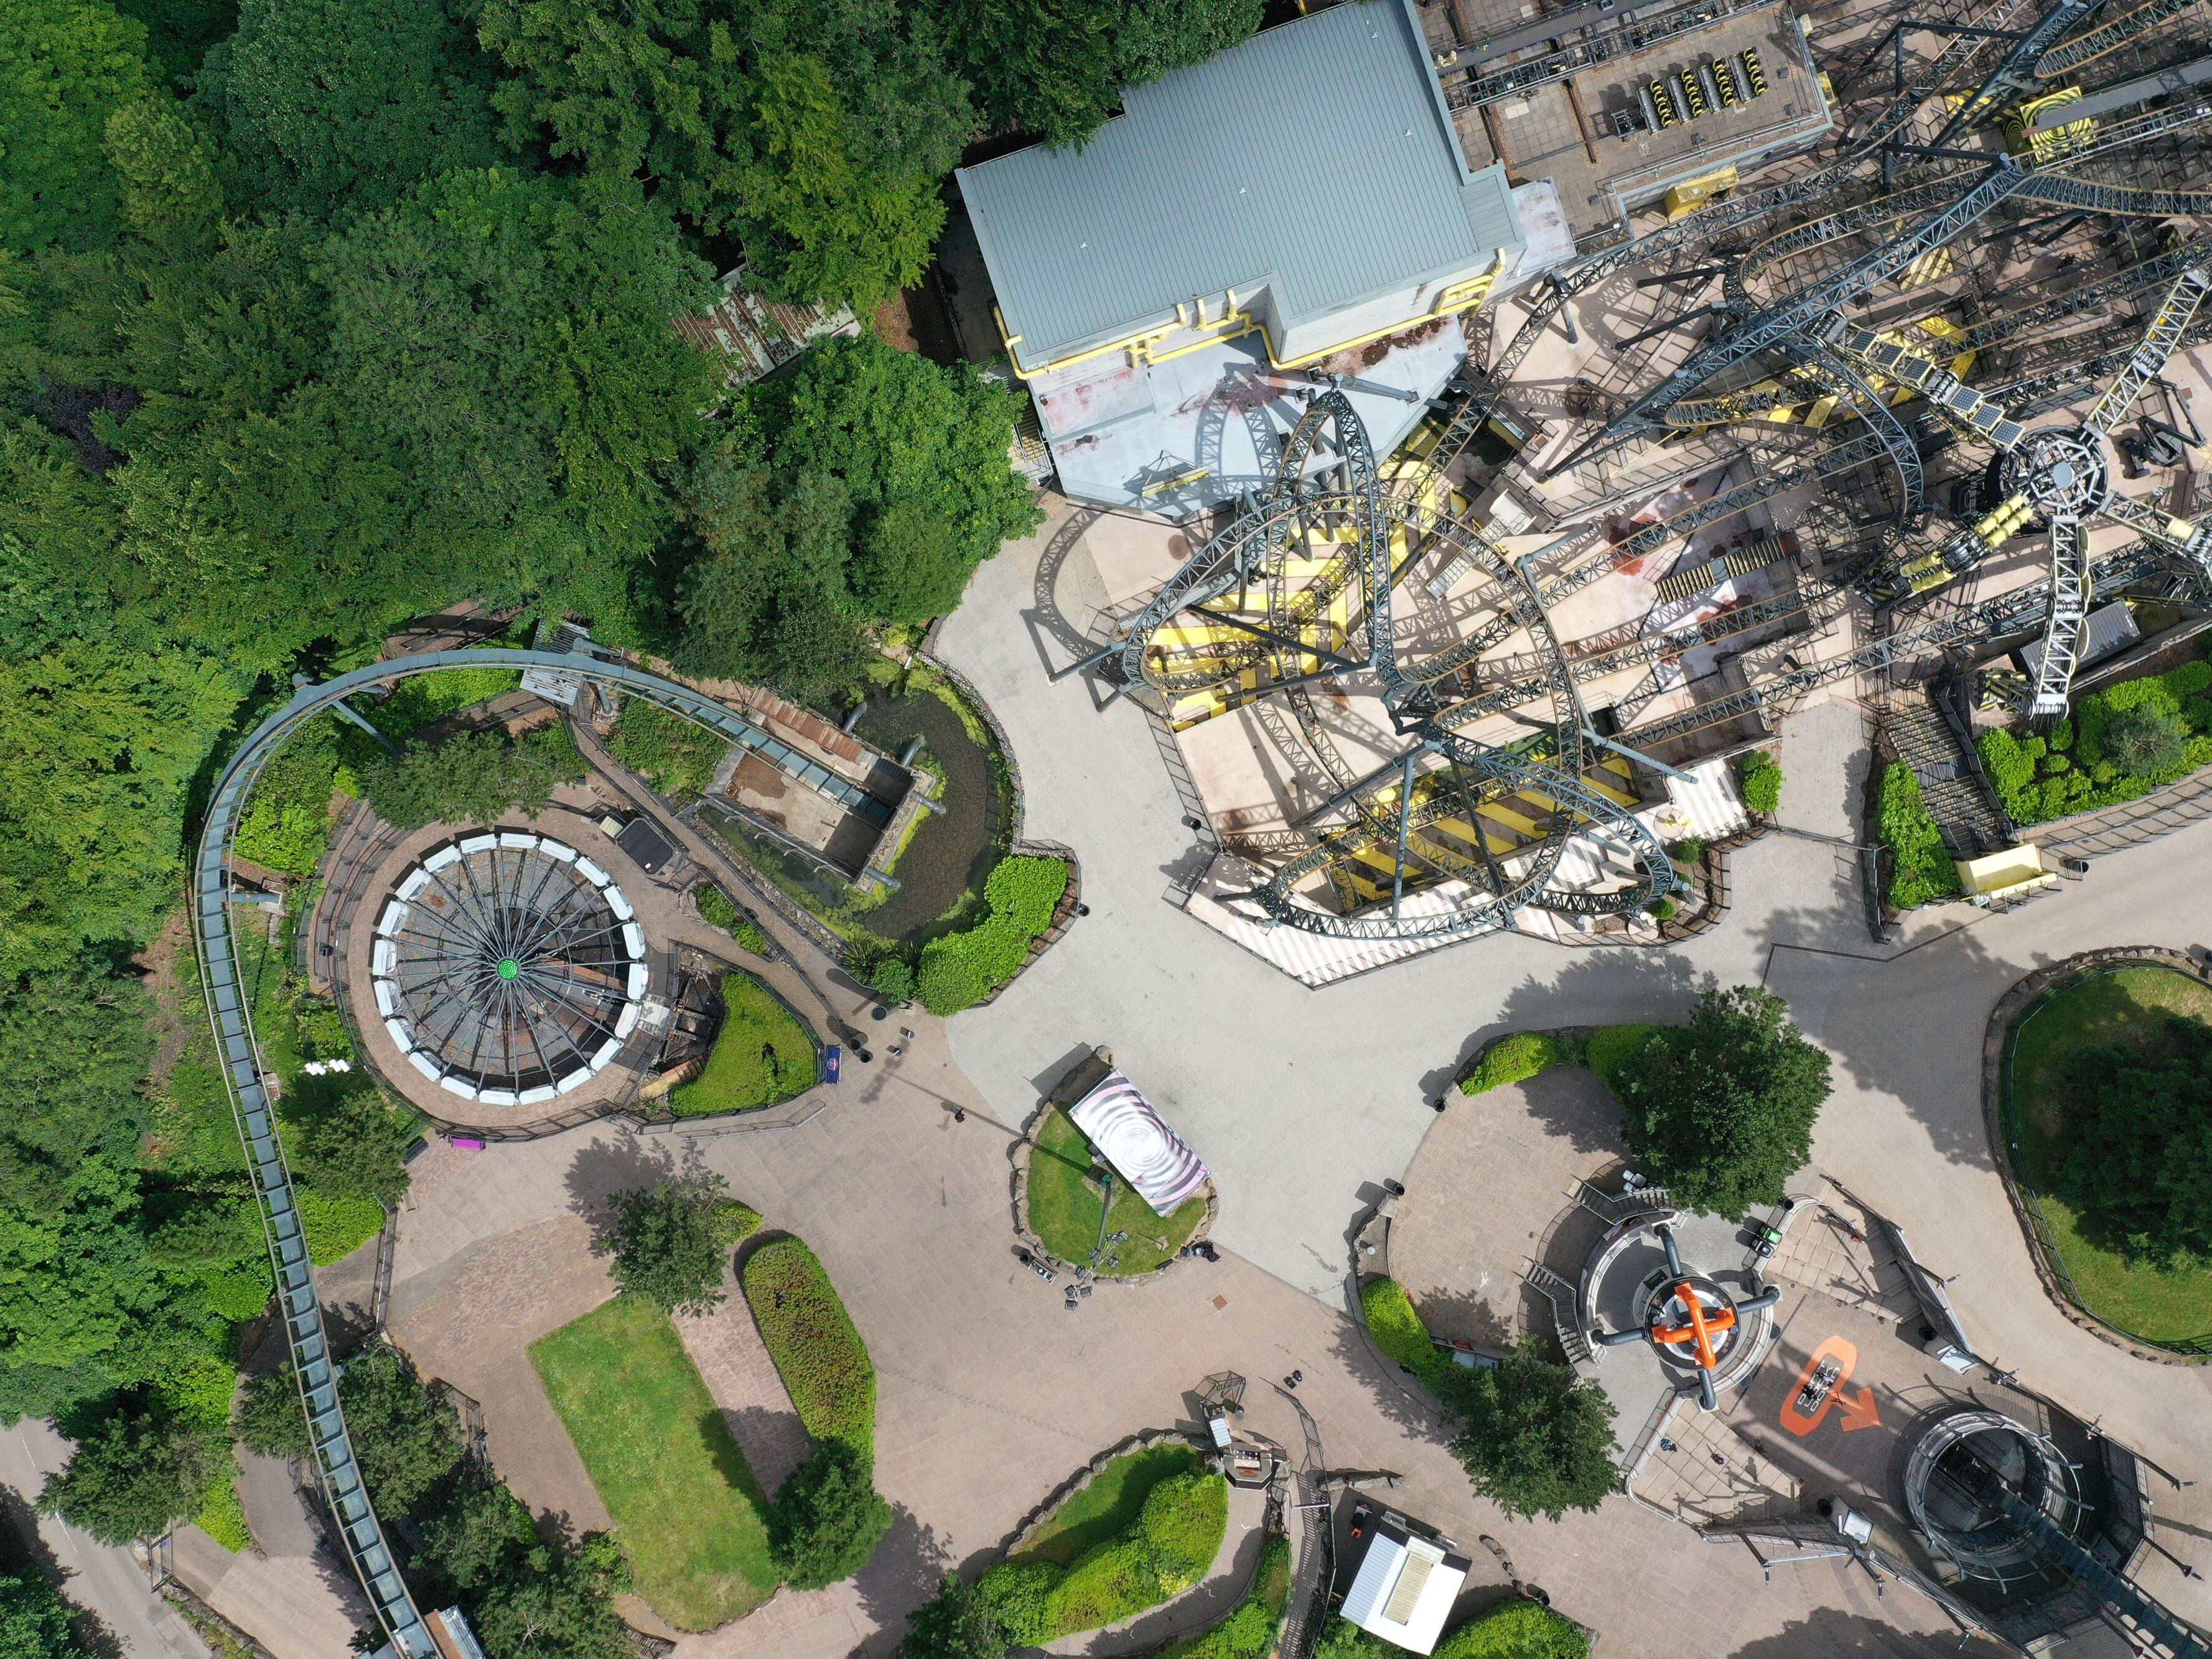 1,000 seasonal jobs available at Alton Towers with full and part-time roles advertised